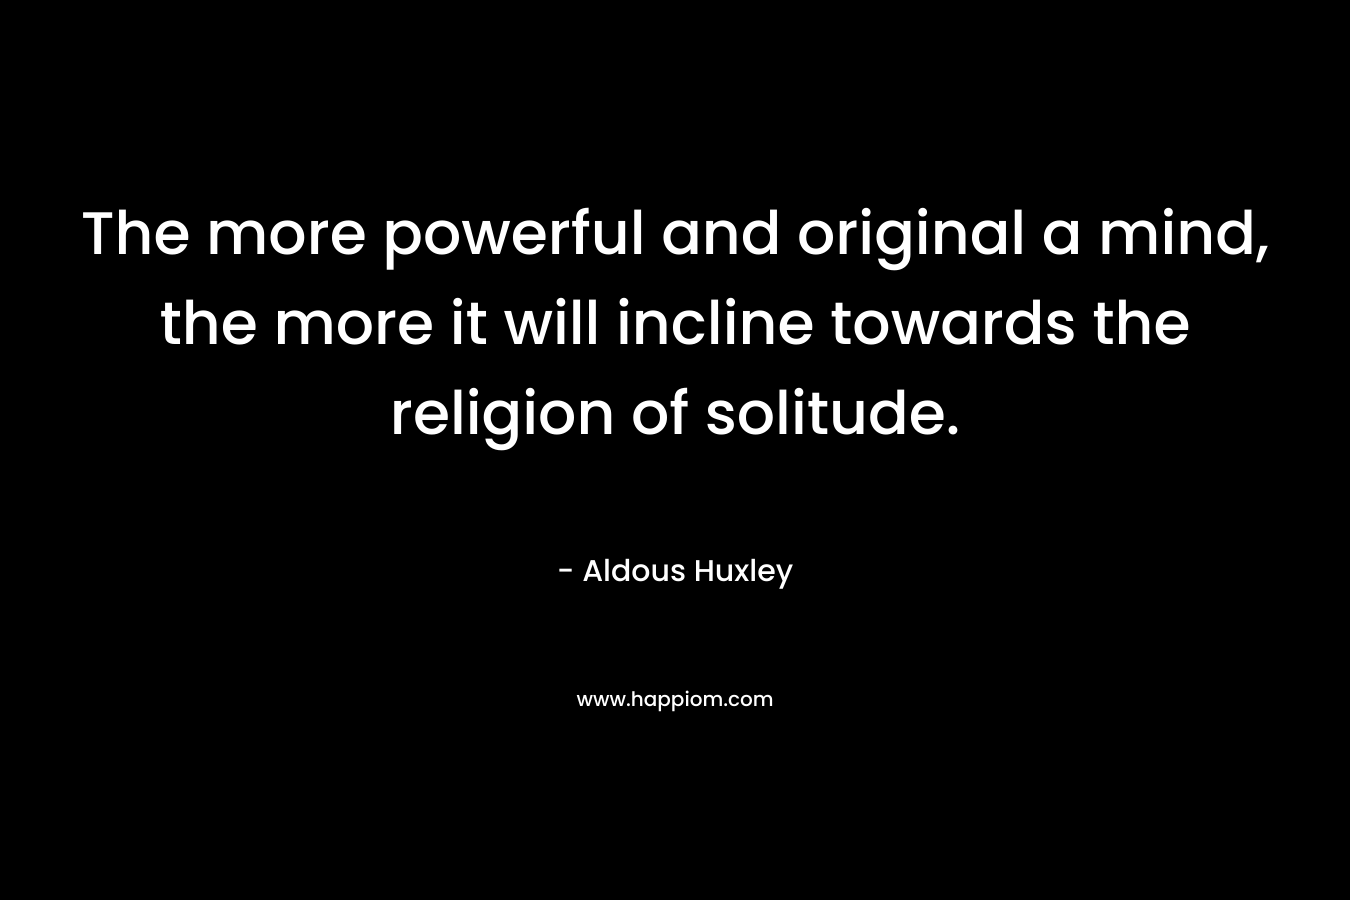 The more powerful and original a mind, the more it will incline towards the religion of solitude. – Aldous Huxley